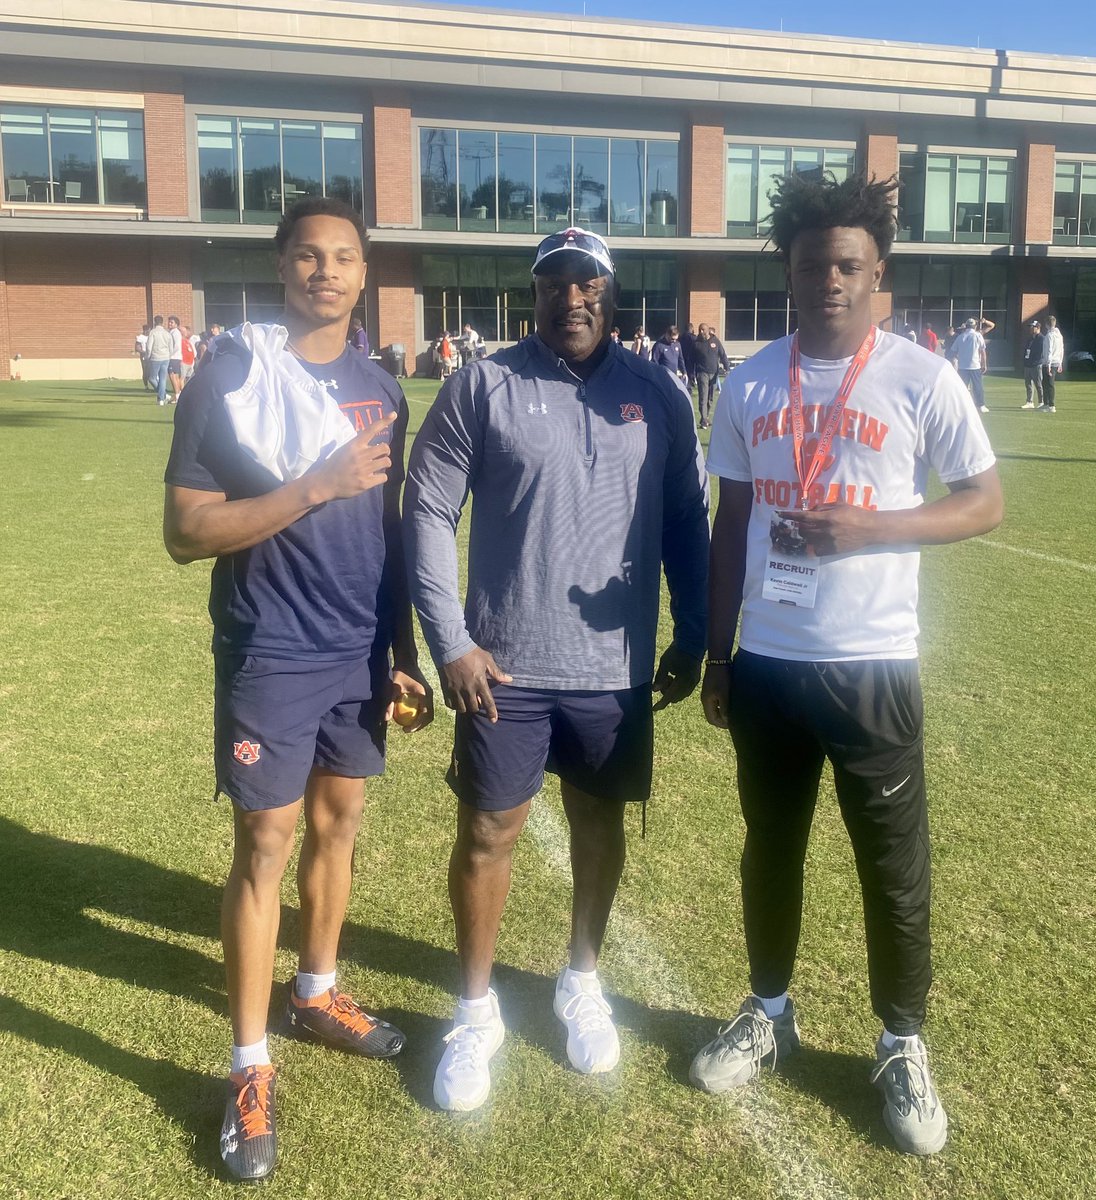 Had a great time visiting @AuburnFootball for their last spring practice. It was great talking with @coachcrimedawg , @CoachA_AU and @therealkwat @ParkviewFB @CoachSturdivan1 @BVEvery @MattDeBary @DukestheScoop @JeremyO_Johnson @1coachlawrence @ethanoffutt84